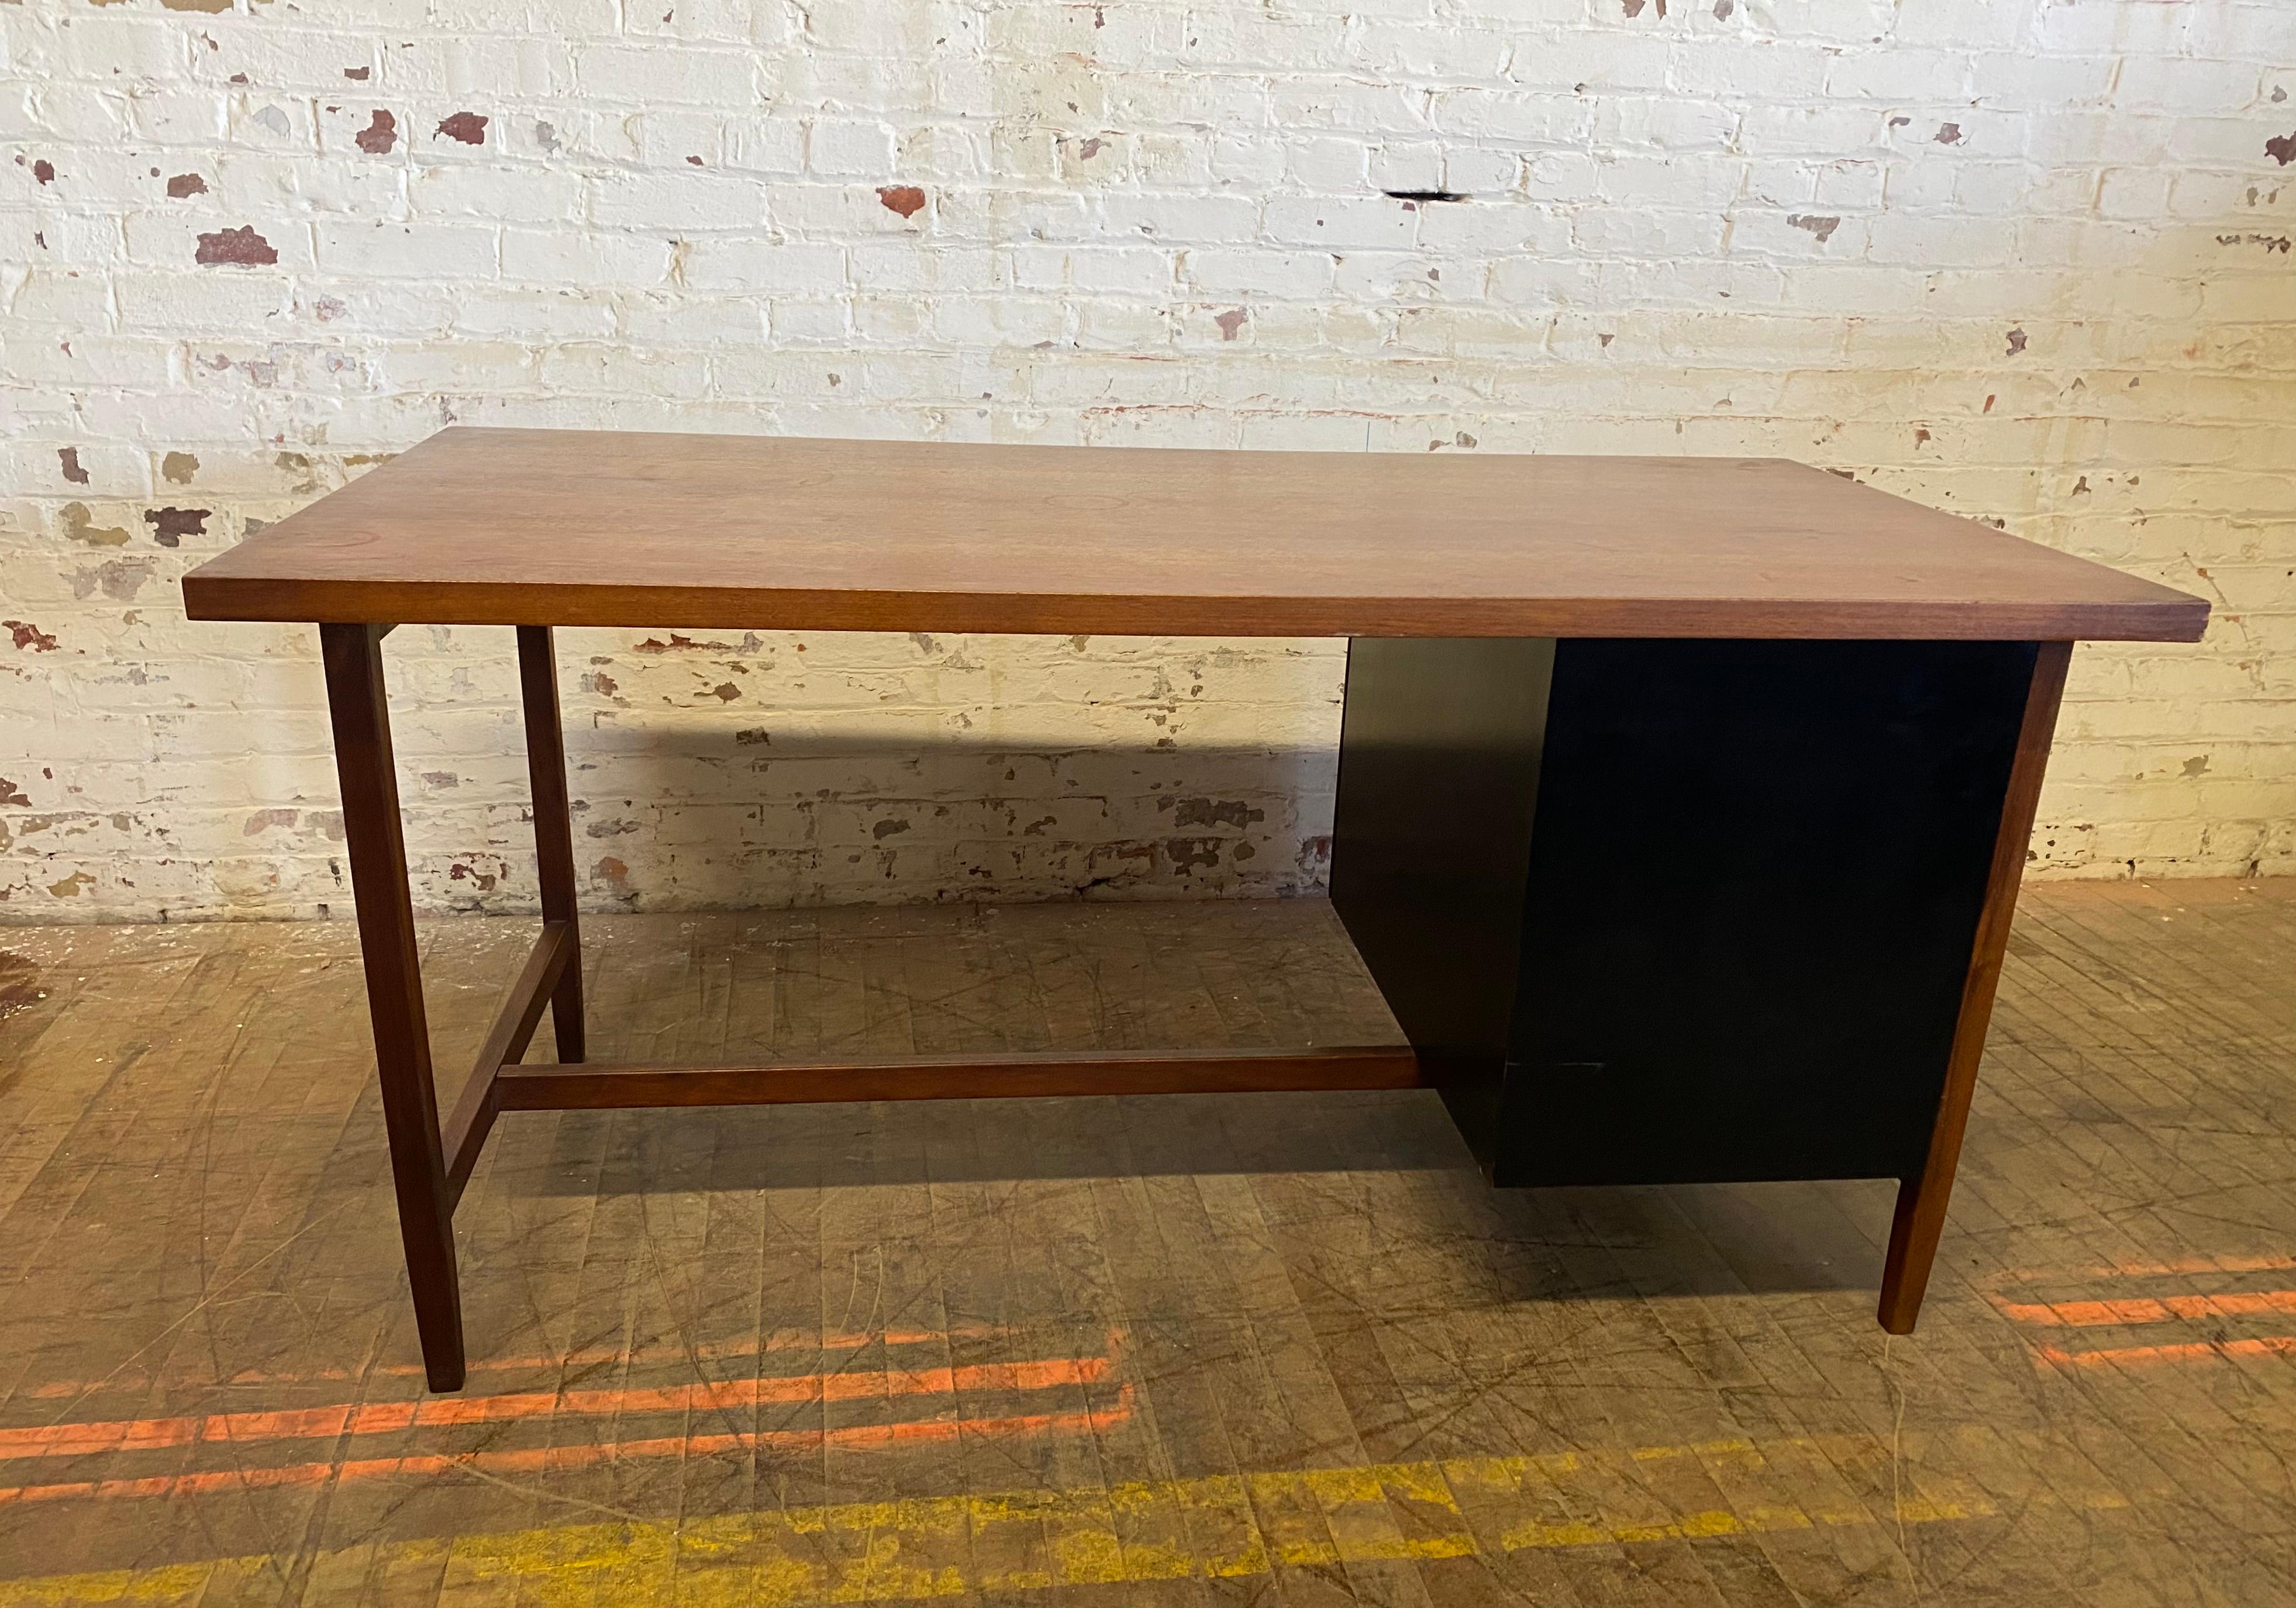 Early production Florence Knoll Desk, Classic Modernist design, Knoll New York For Sale 5